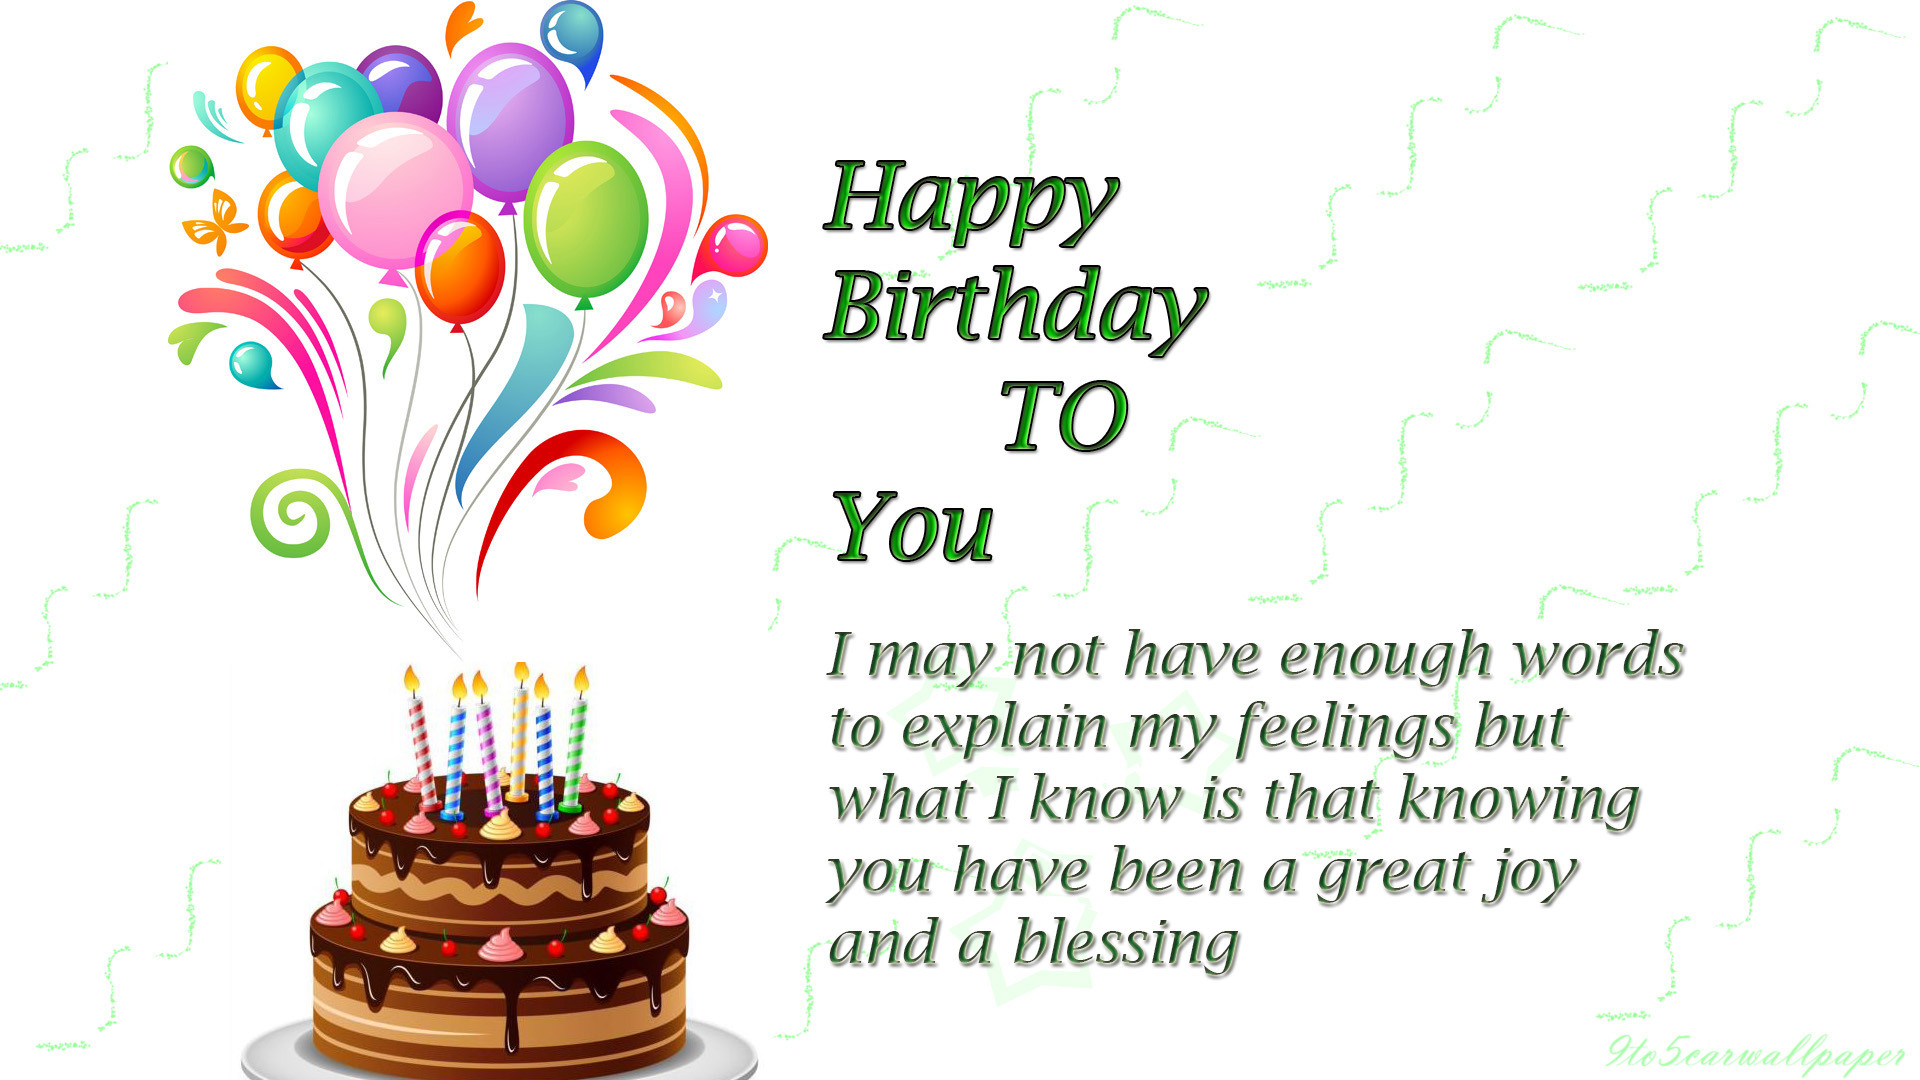 Birthday Images With Quotes
 Birthday Quotes Wishes and Wallpapers My Site